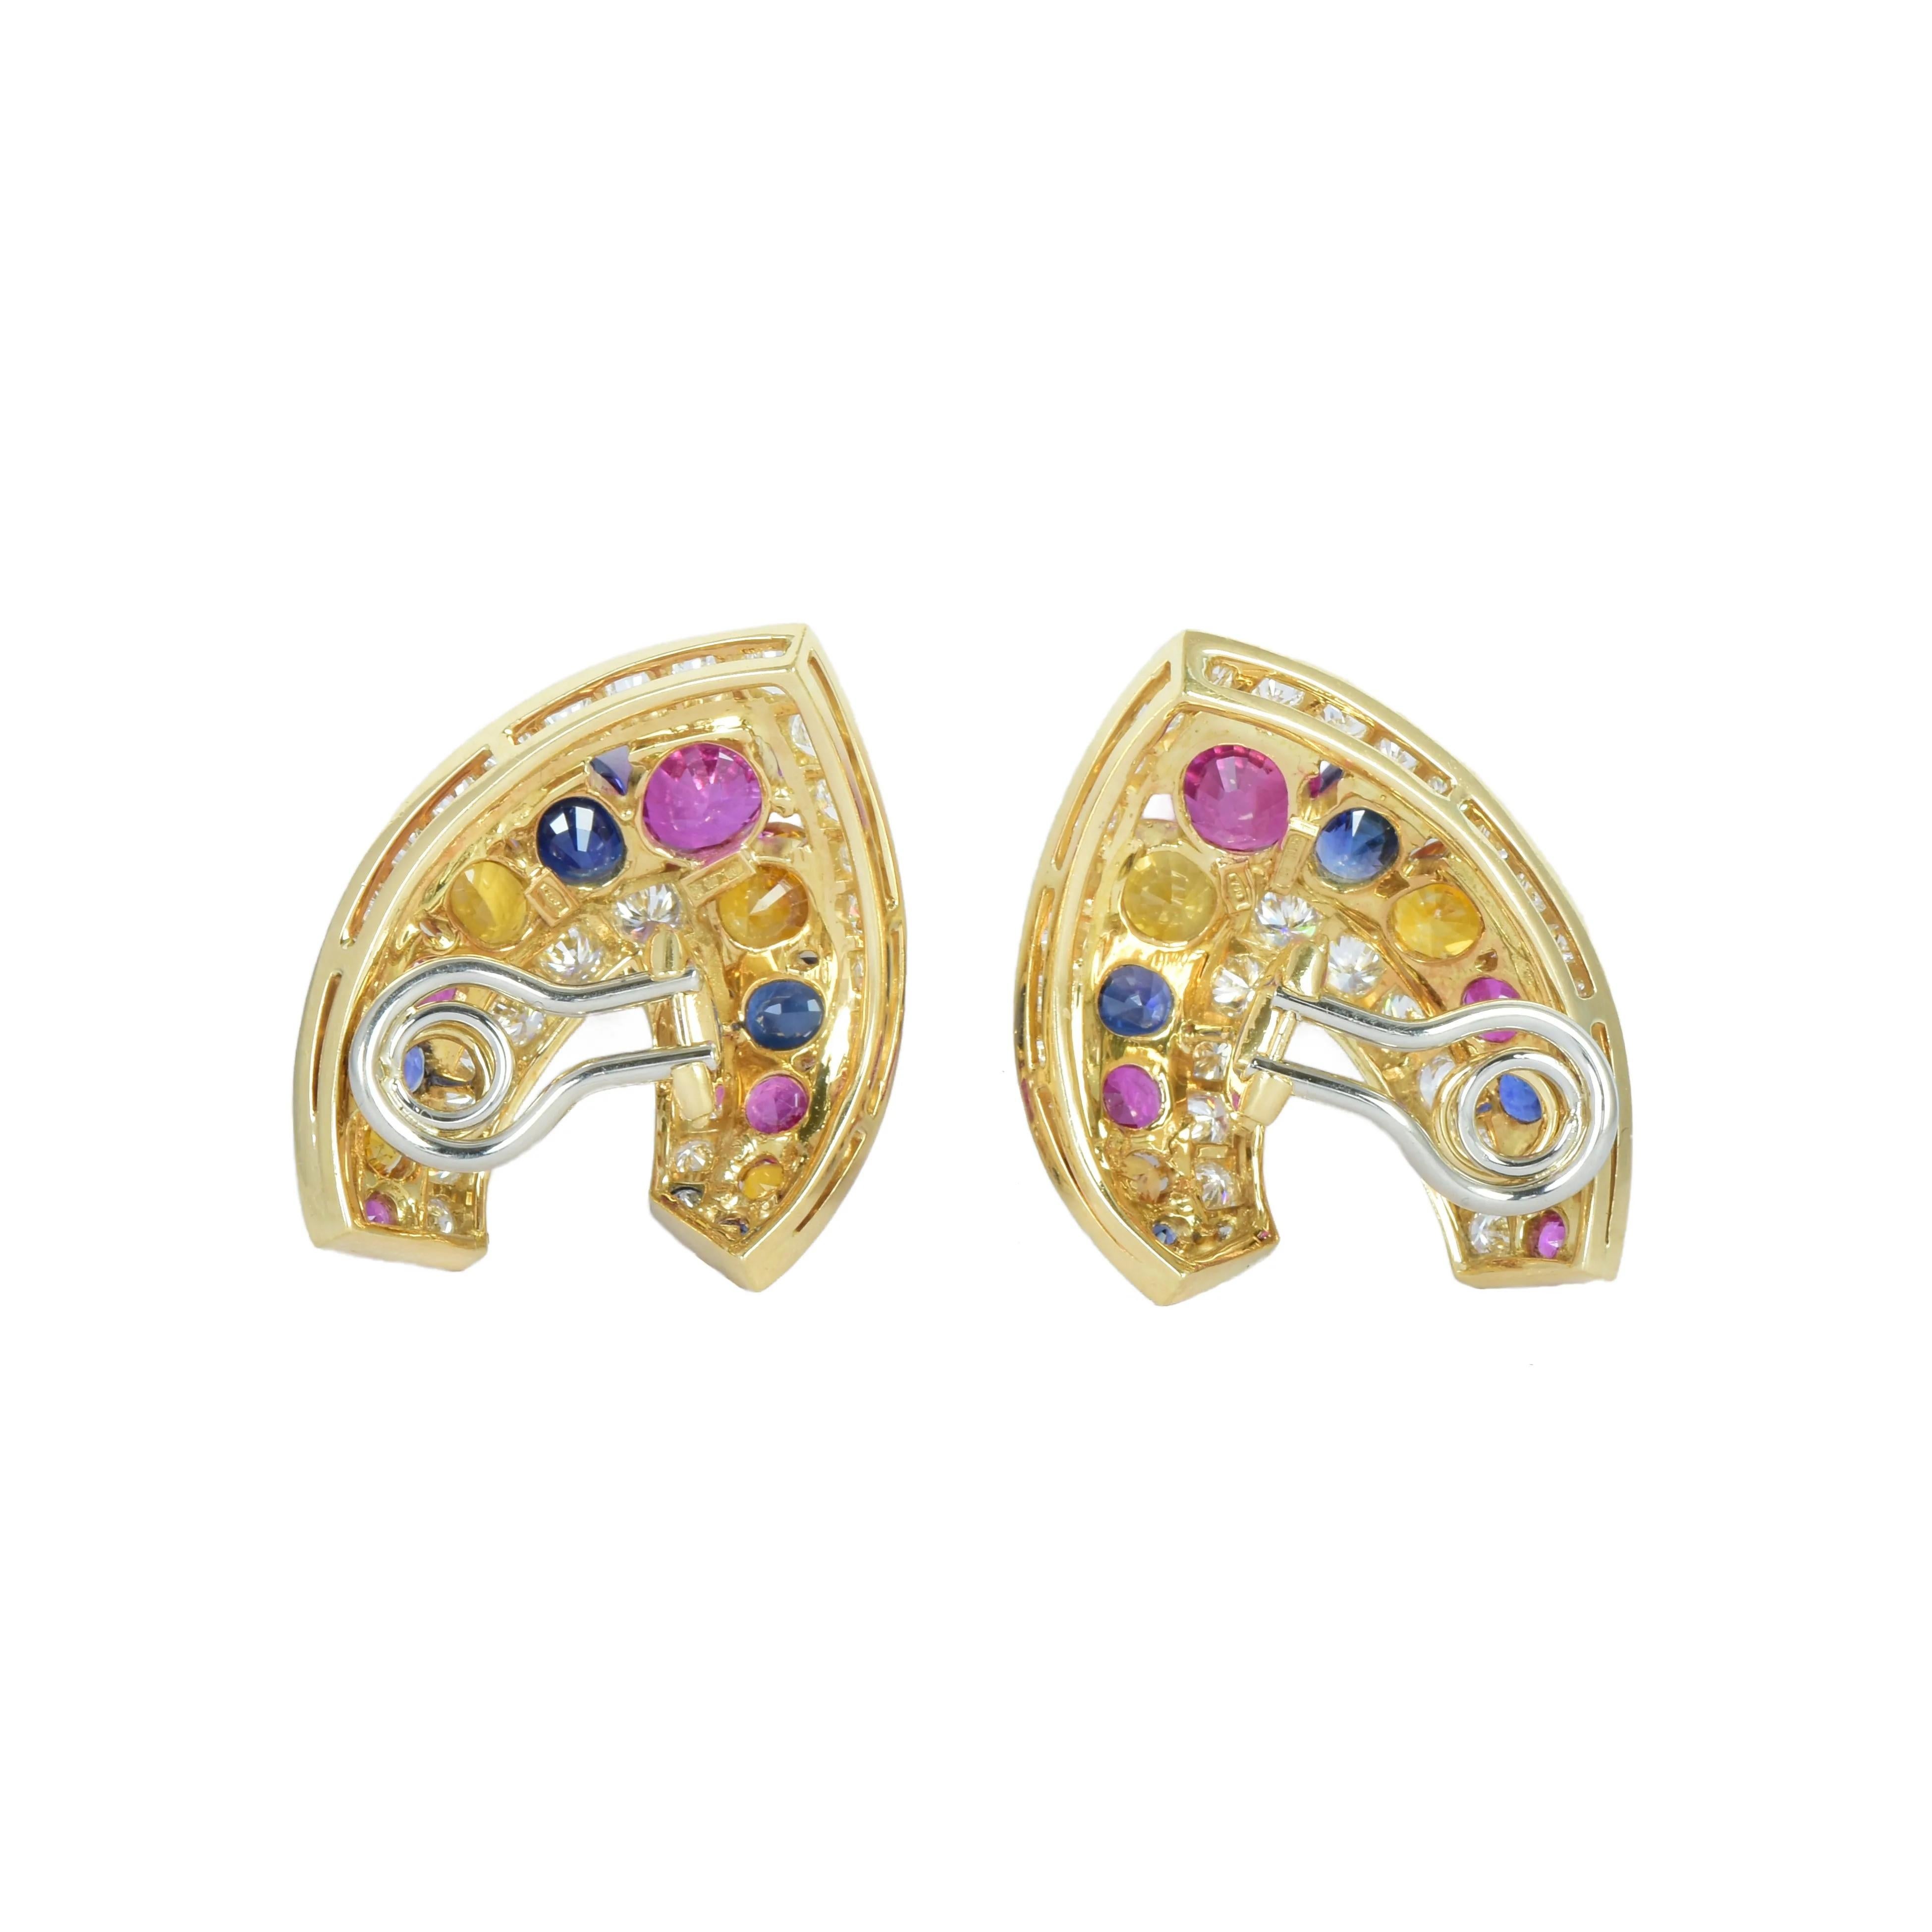 Contemporary Vintage 18k Gold Sapphire & Diamond Earrings For Sale